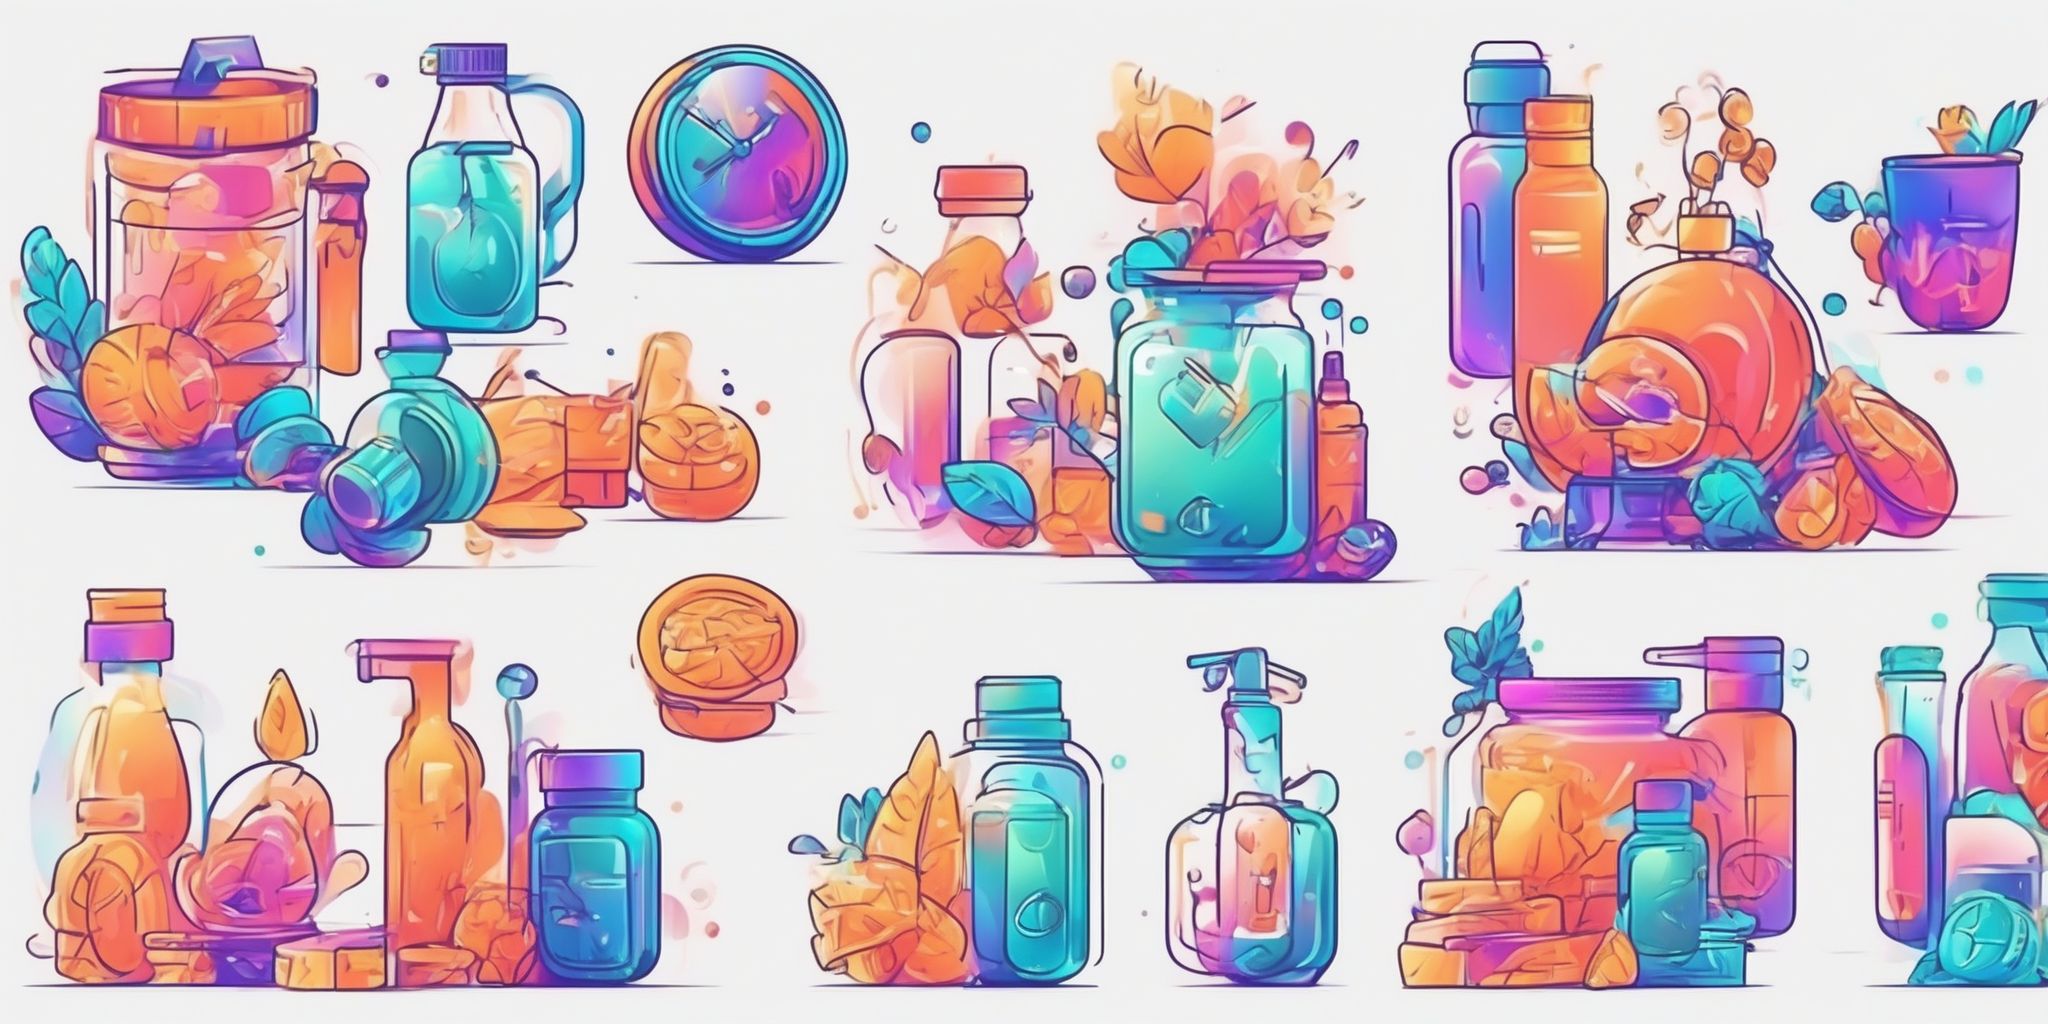 Cost in illustration style with gradients and white background